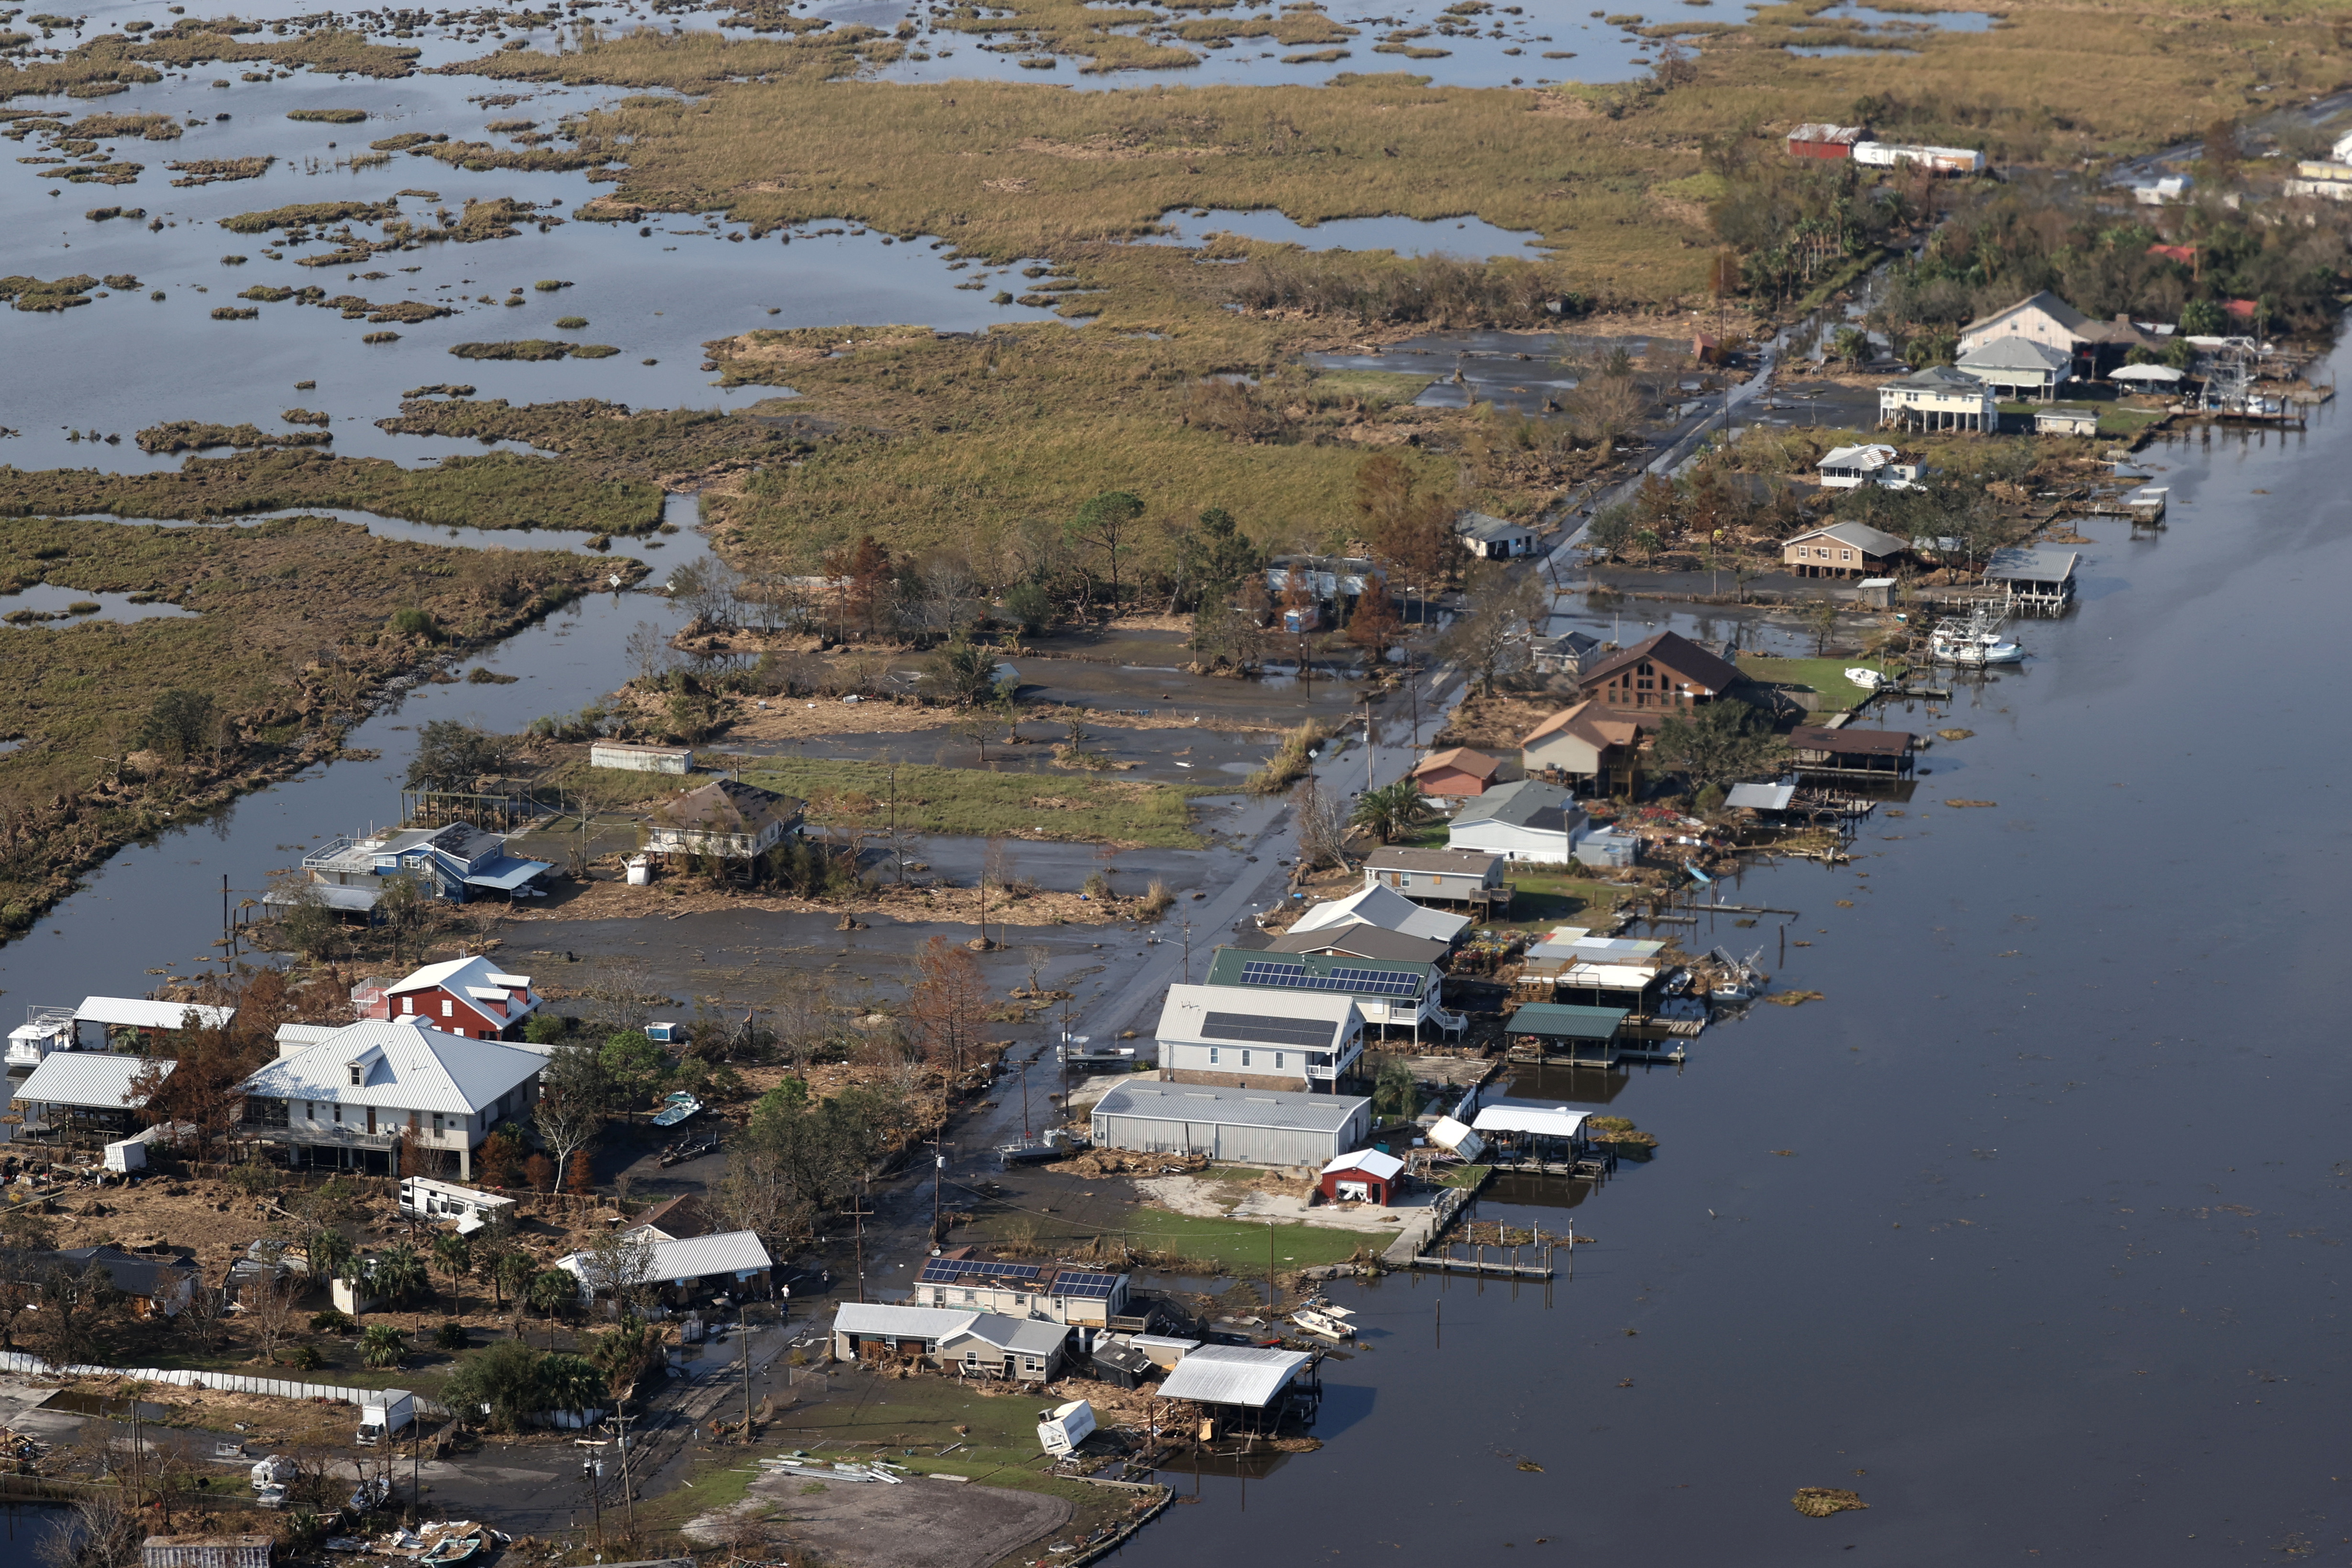 A view shows debris and buildings damaged from Hurricane Ida during U.S. President Joe Biden's aerial tour of communities in Laffite, Grand Isle, Port Fourchon and Lafourche Parish, Louisiana